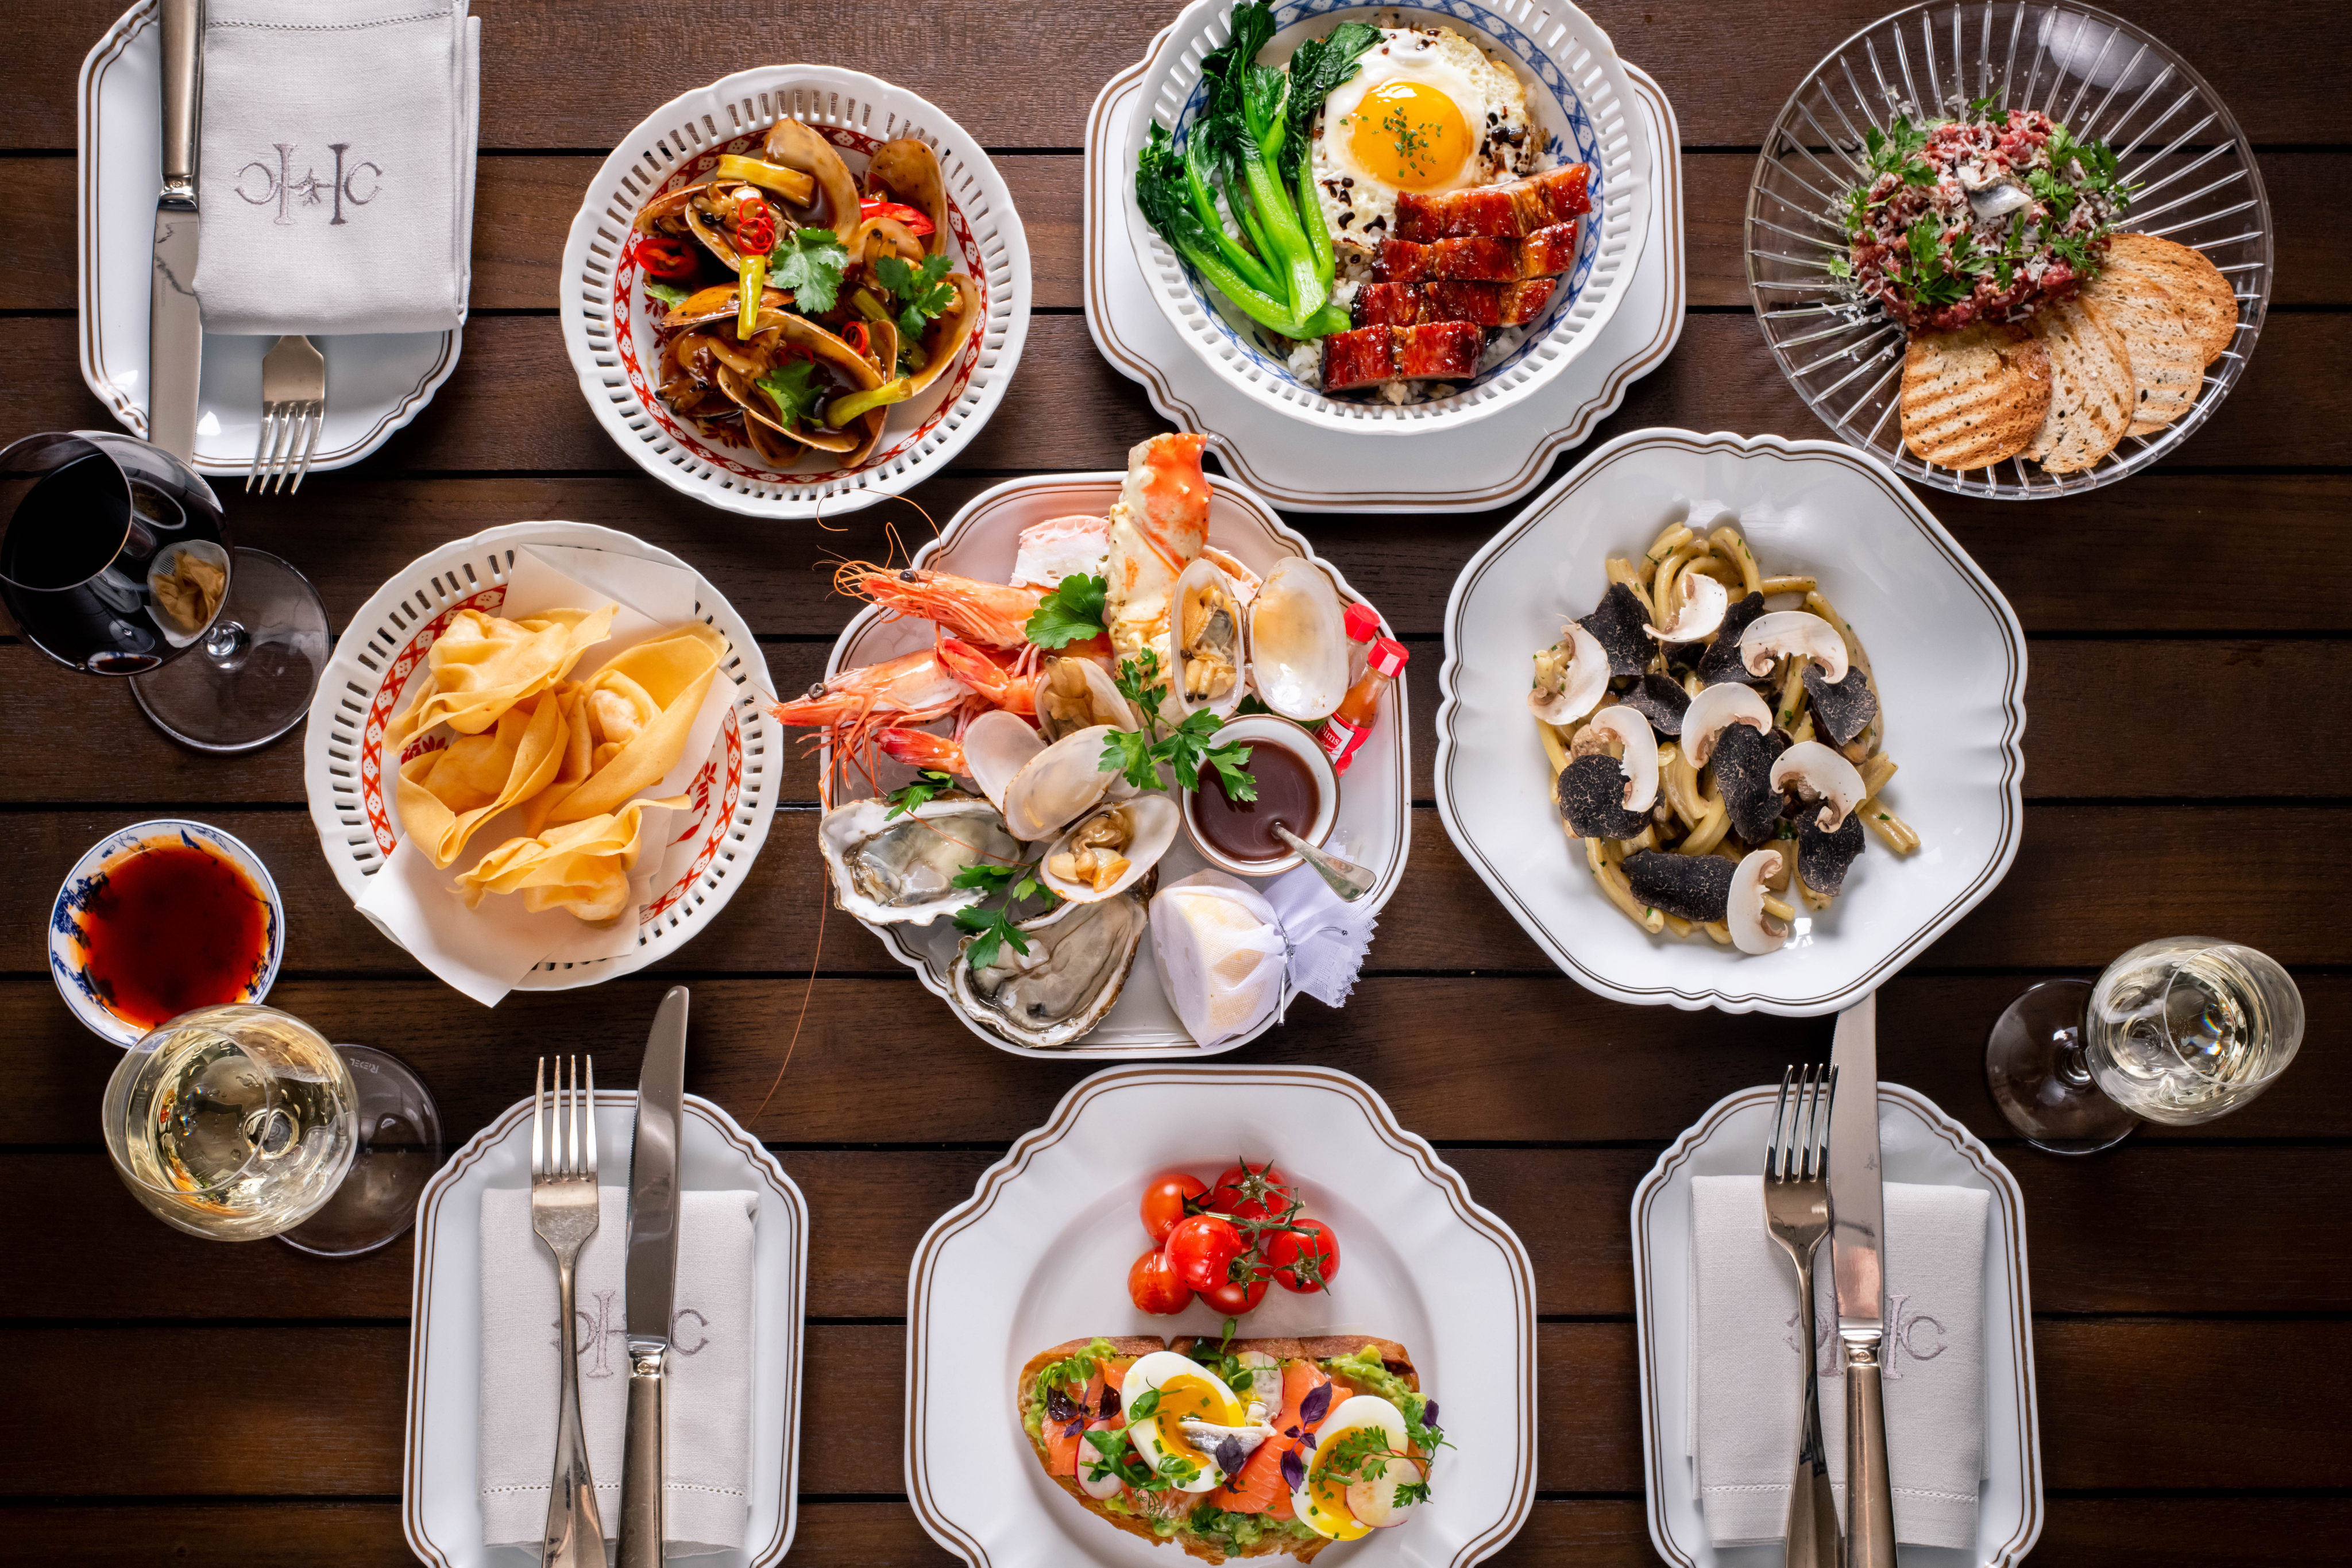 Sunday brunch at Holt’s Cafe, in the Rosewood Hong Kong, one of several new reasons to get excited about eating out in the city again. Photo: Handout